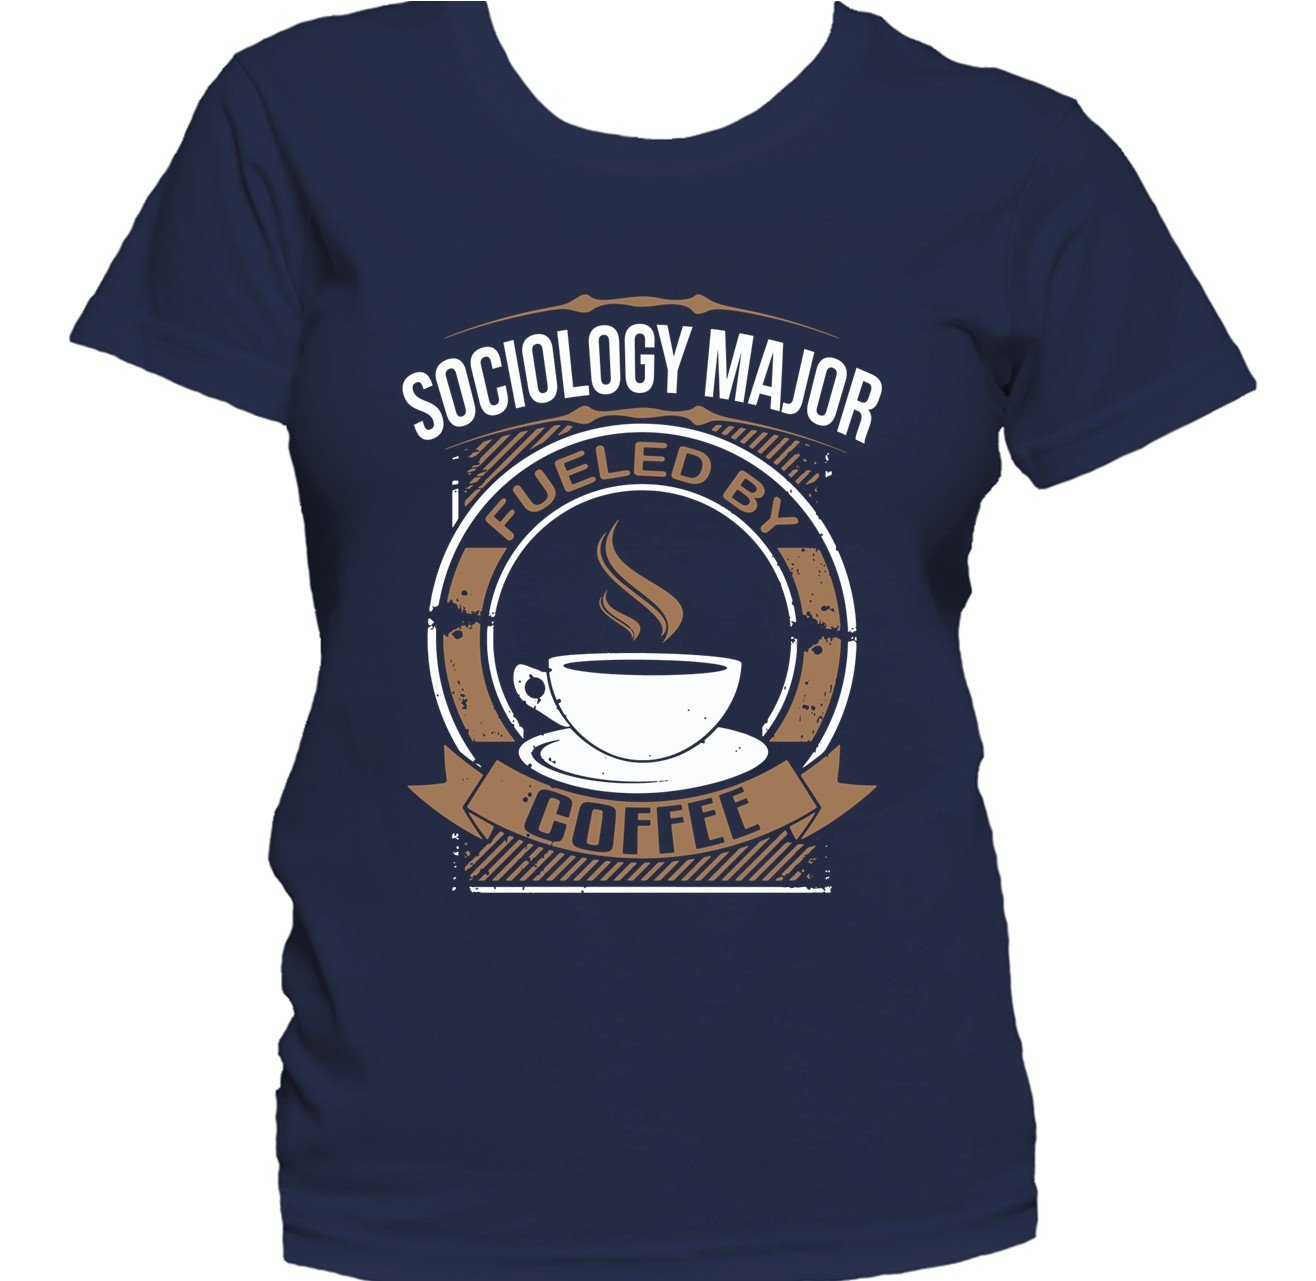 Sociology Major Fueled By Coffee Funny College Student Women's T-Shirt